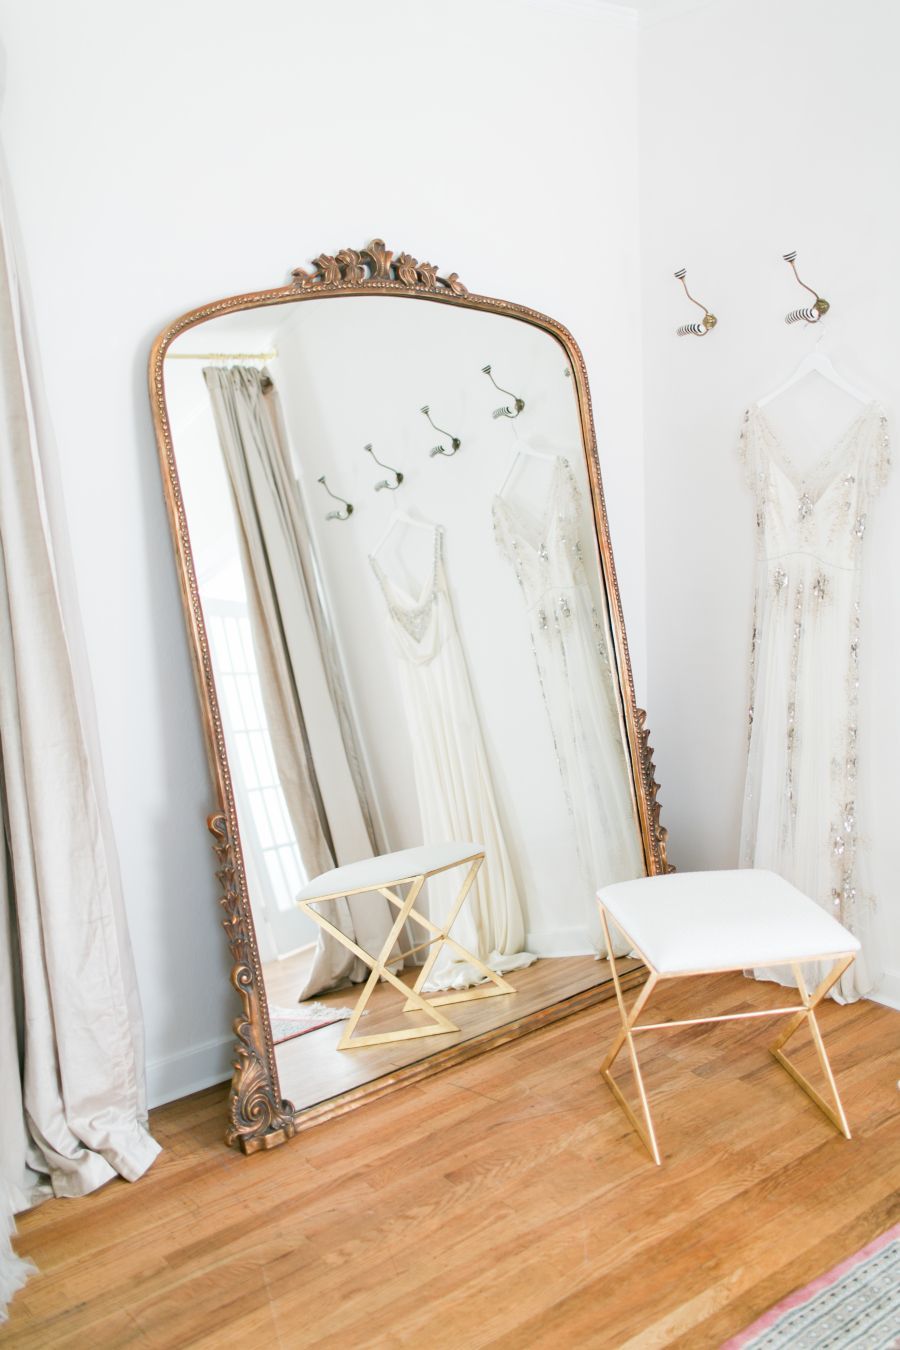 A Dress Shop So Pretty We Want to Move In -   11 vintage dress Room ideas